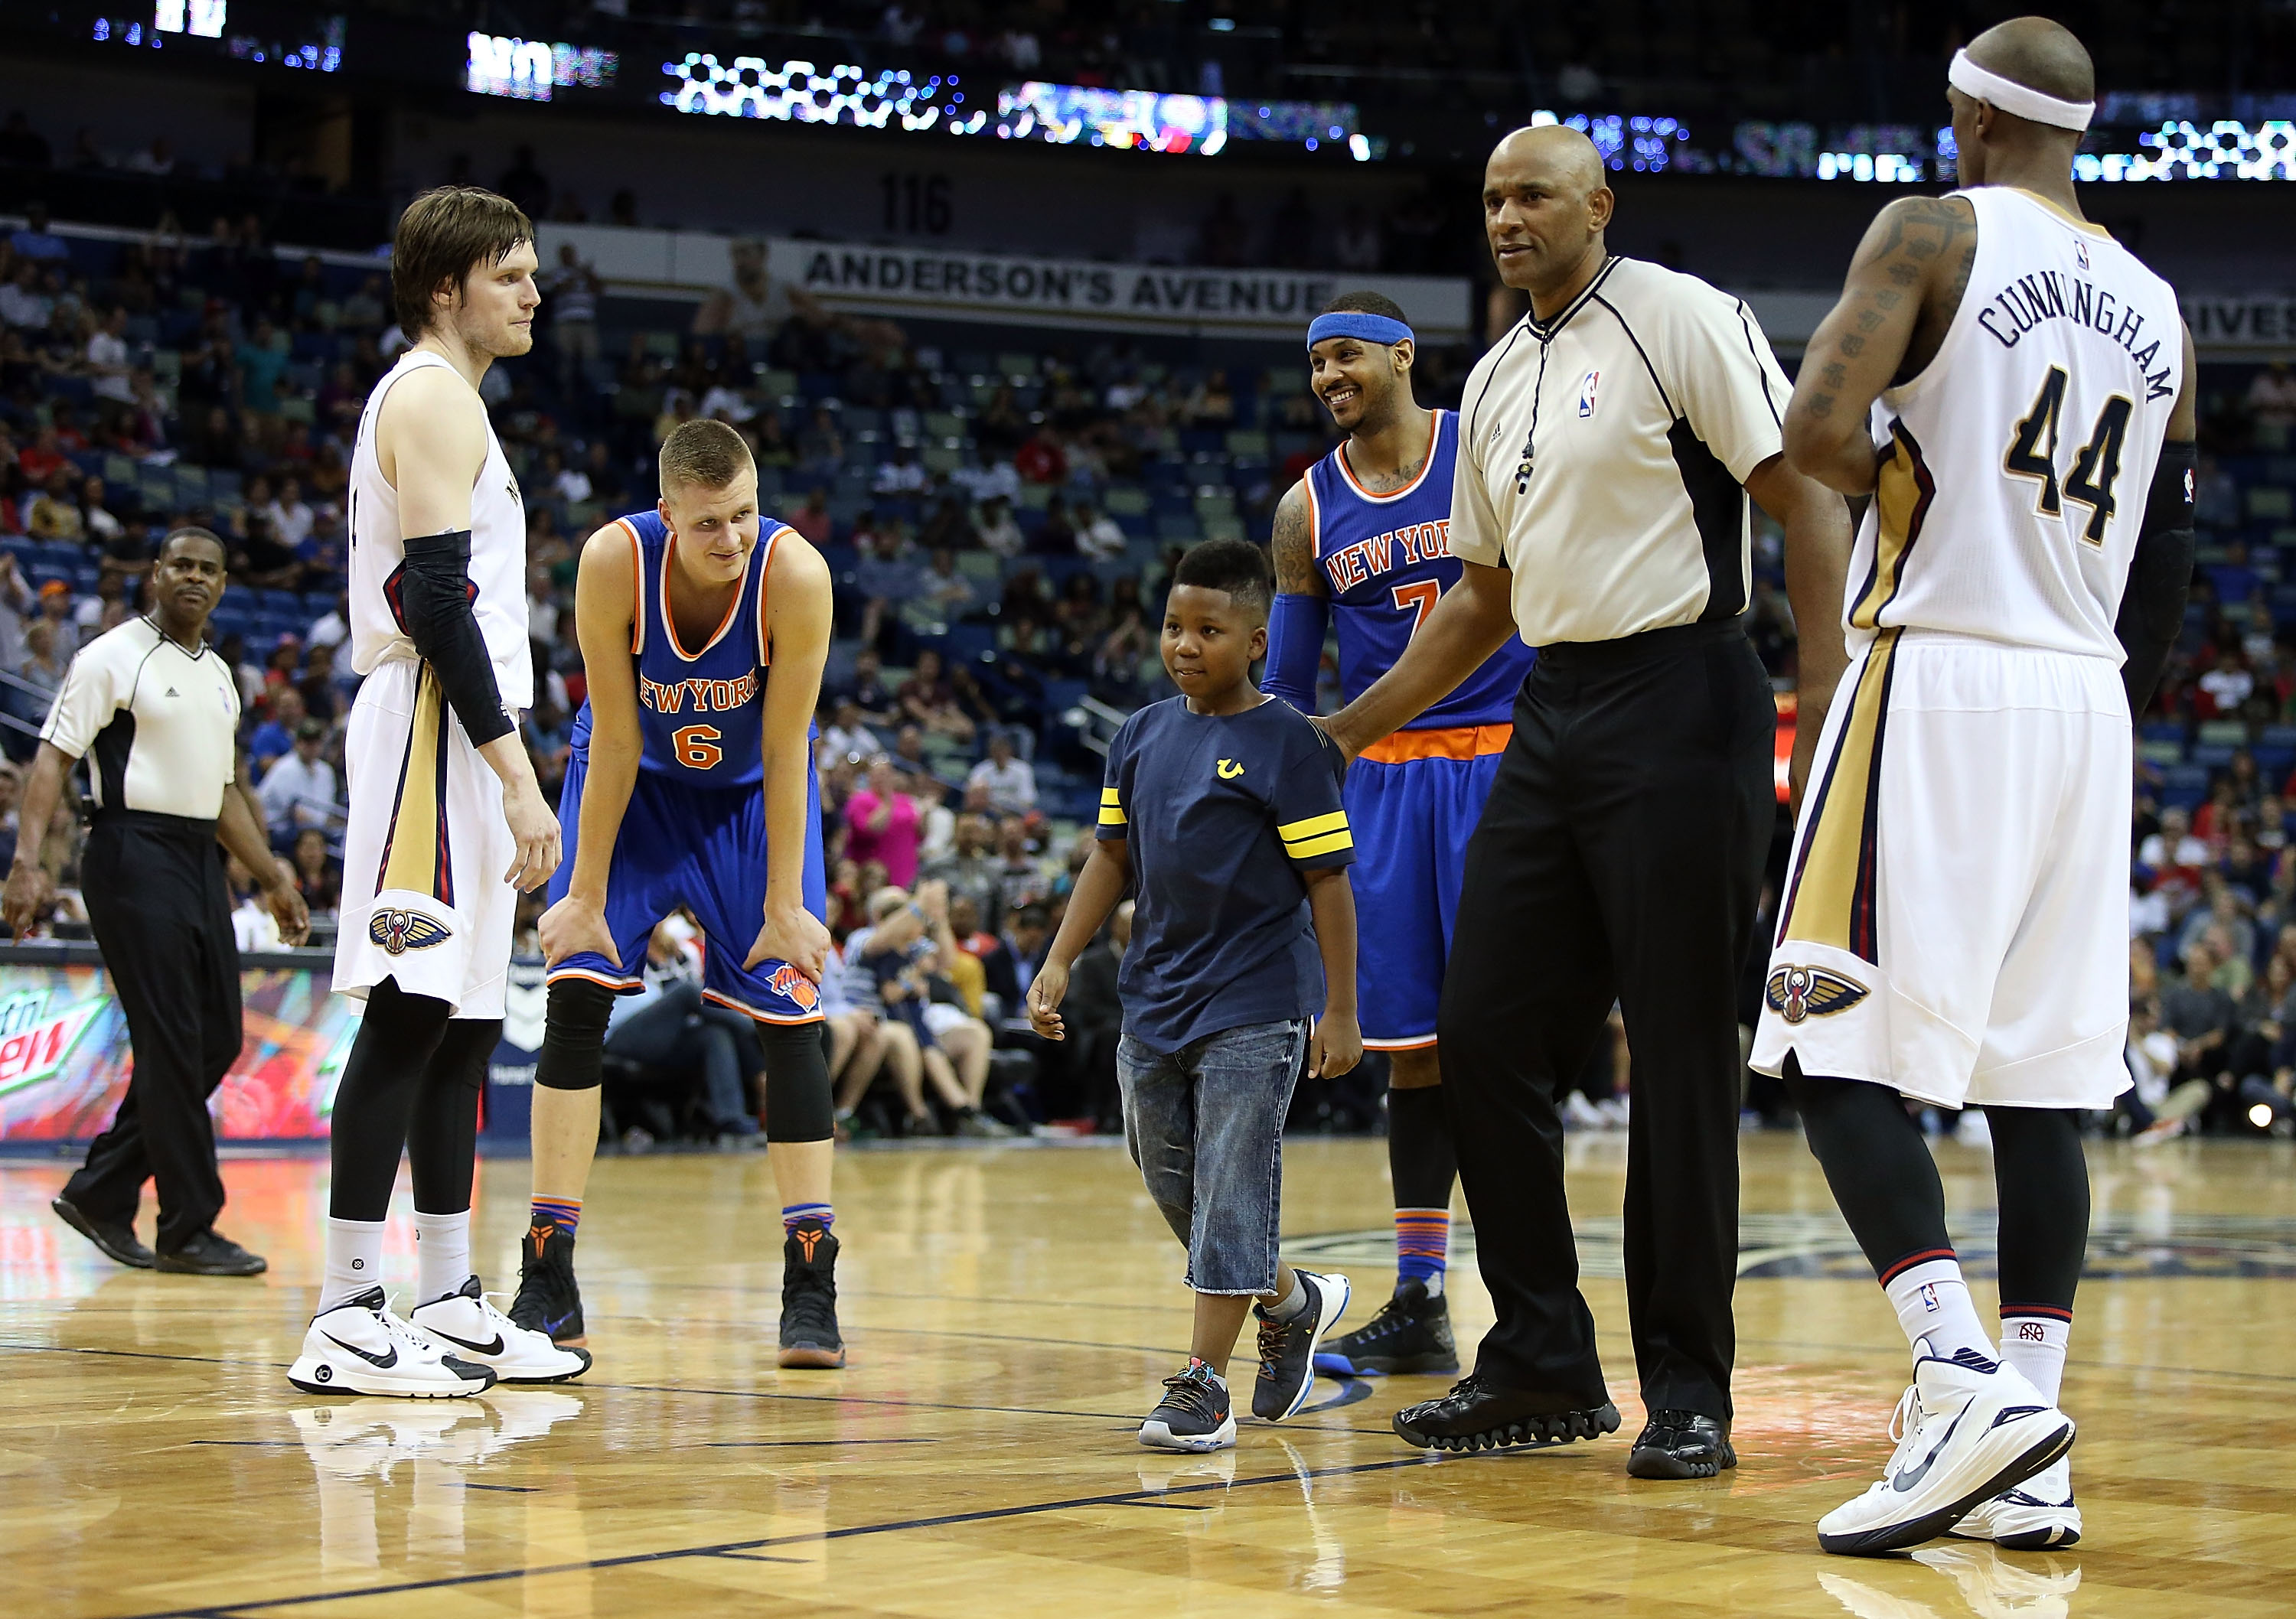 A young boy is escorted off the court after hugging Carmelo Anthony #7 of the New York Knicks during a game against the New Orleans Pelicans during the second half at the Smoothie King Center on March 28, 2016 in New Orleans, Louisiana. (Sean Gardner/Getty Images)